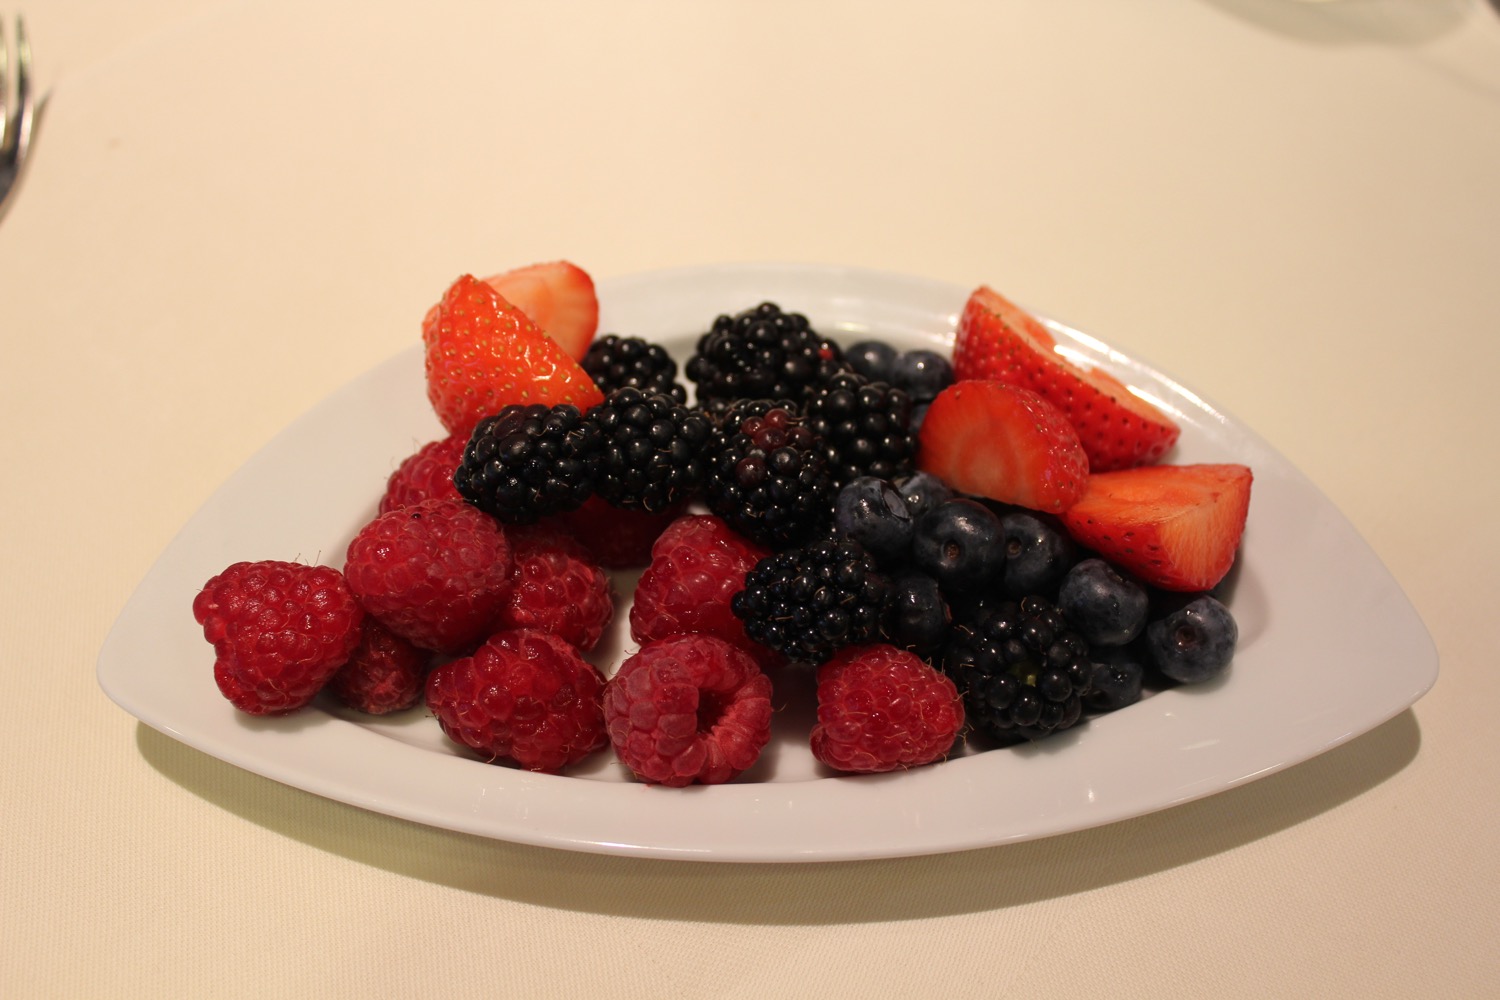 a plate of berries on a table